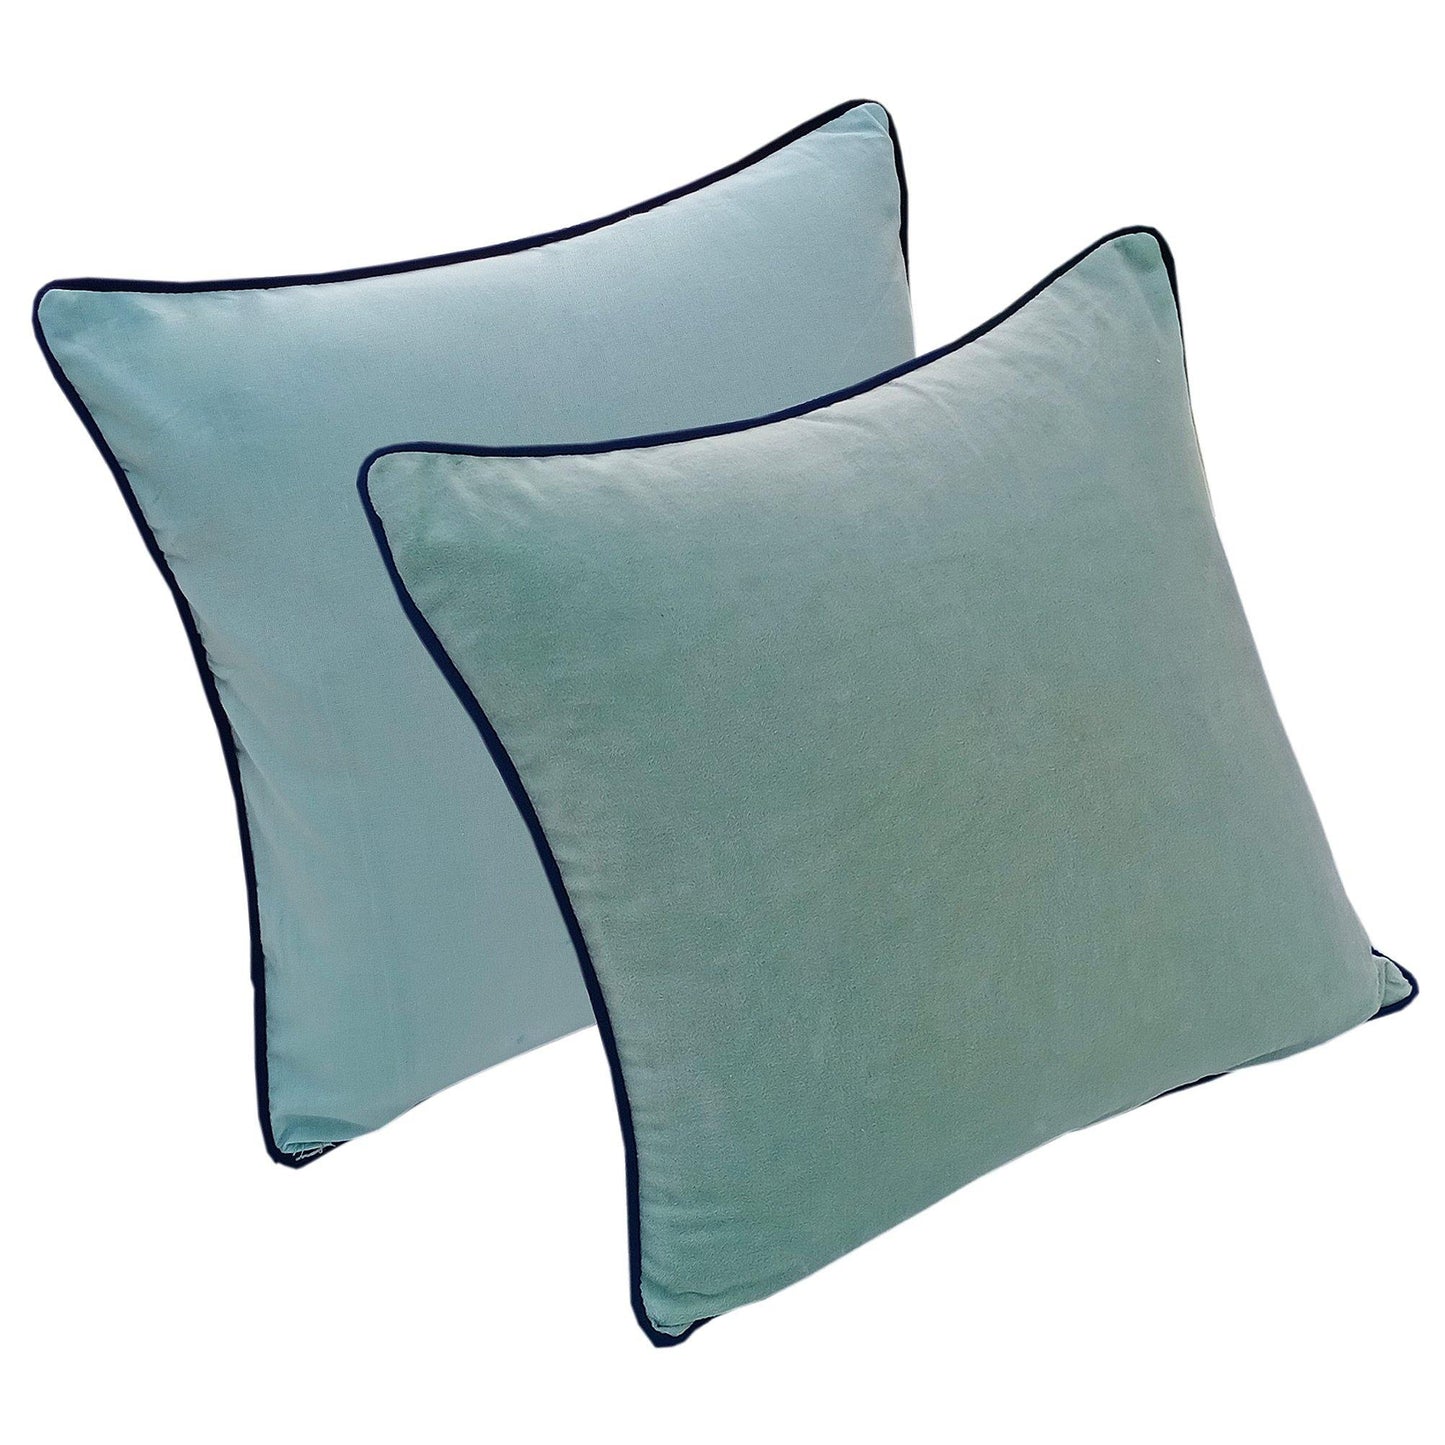 Grey Velvet Cushion Cover with piping - The Teal Thread